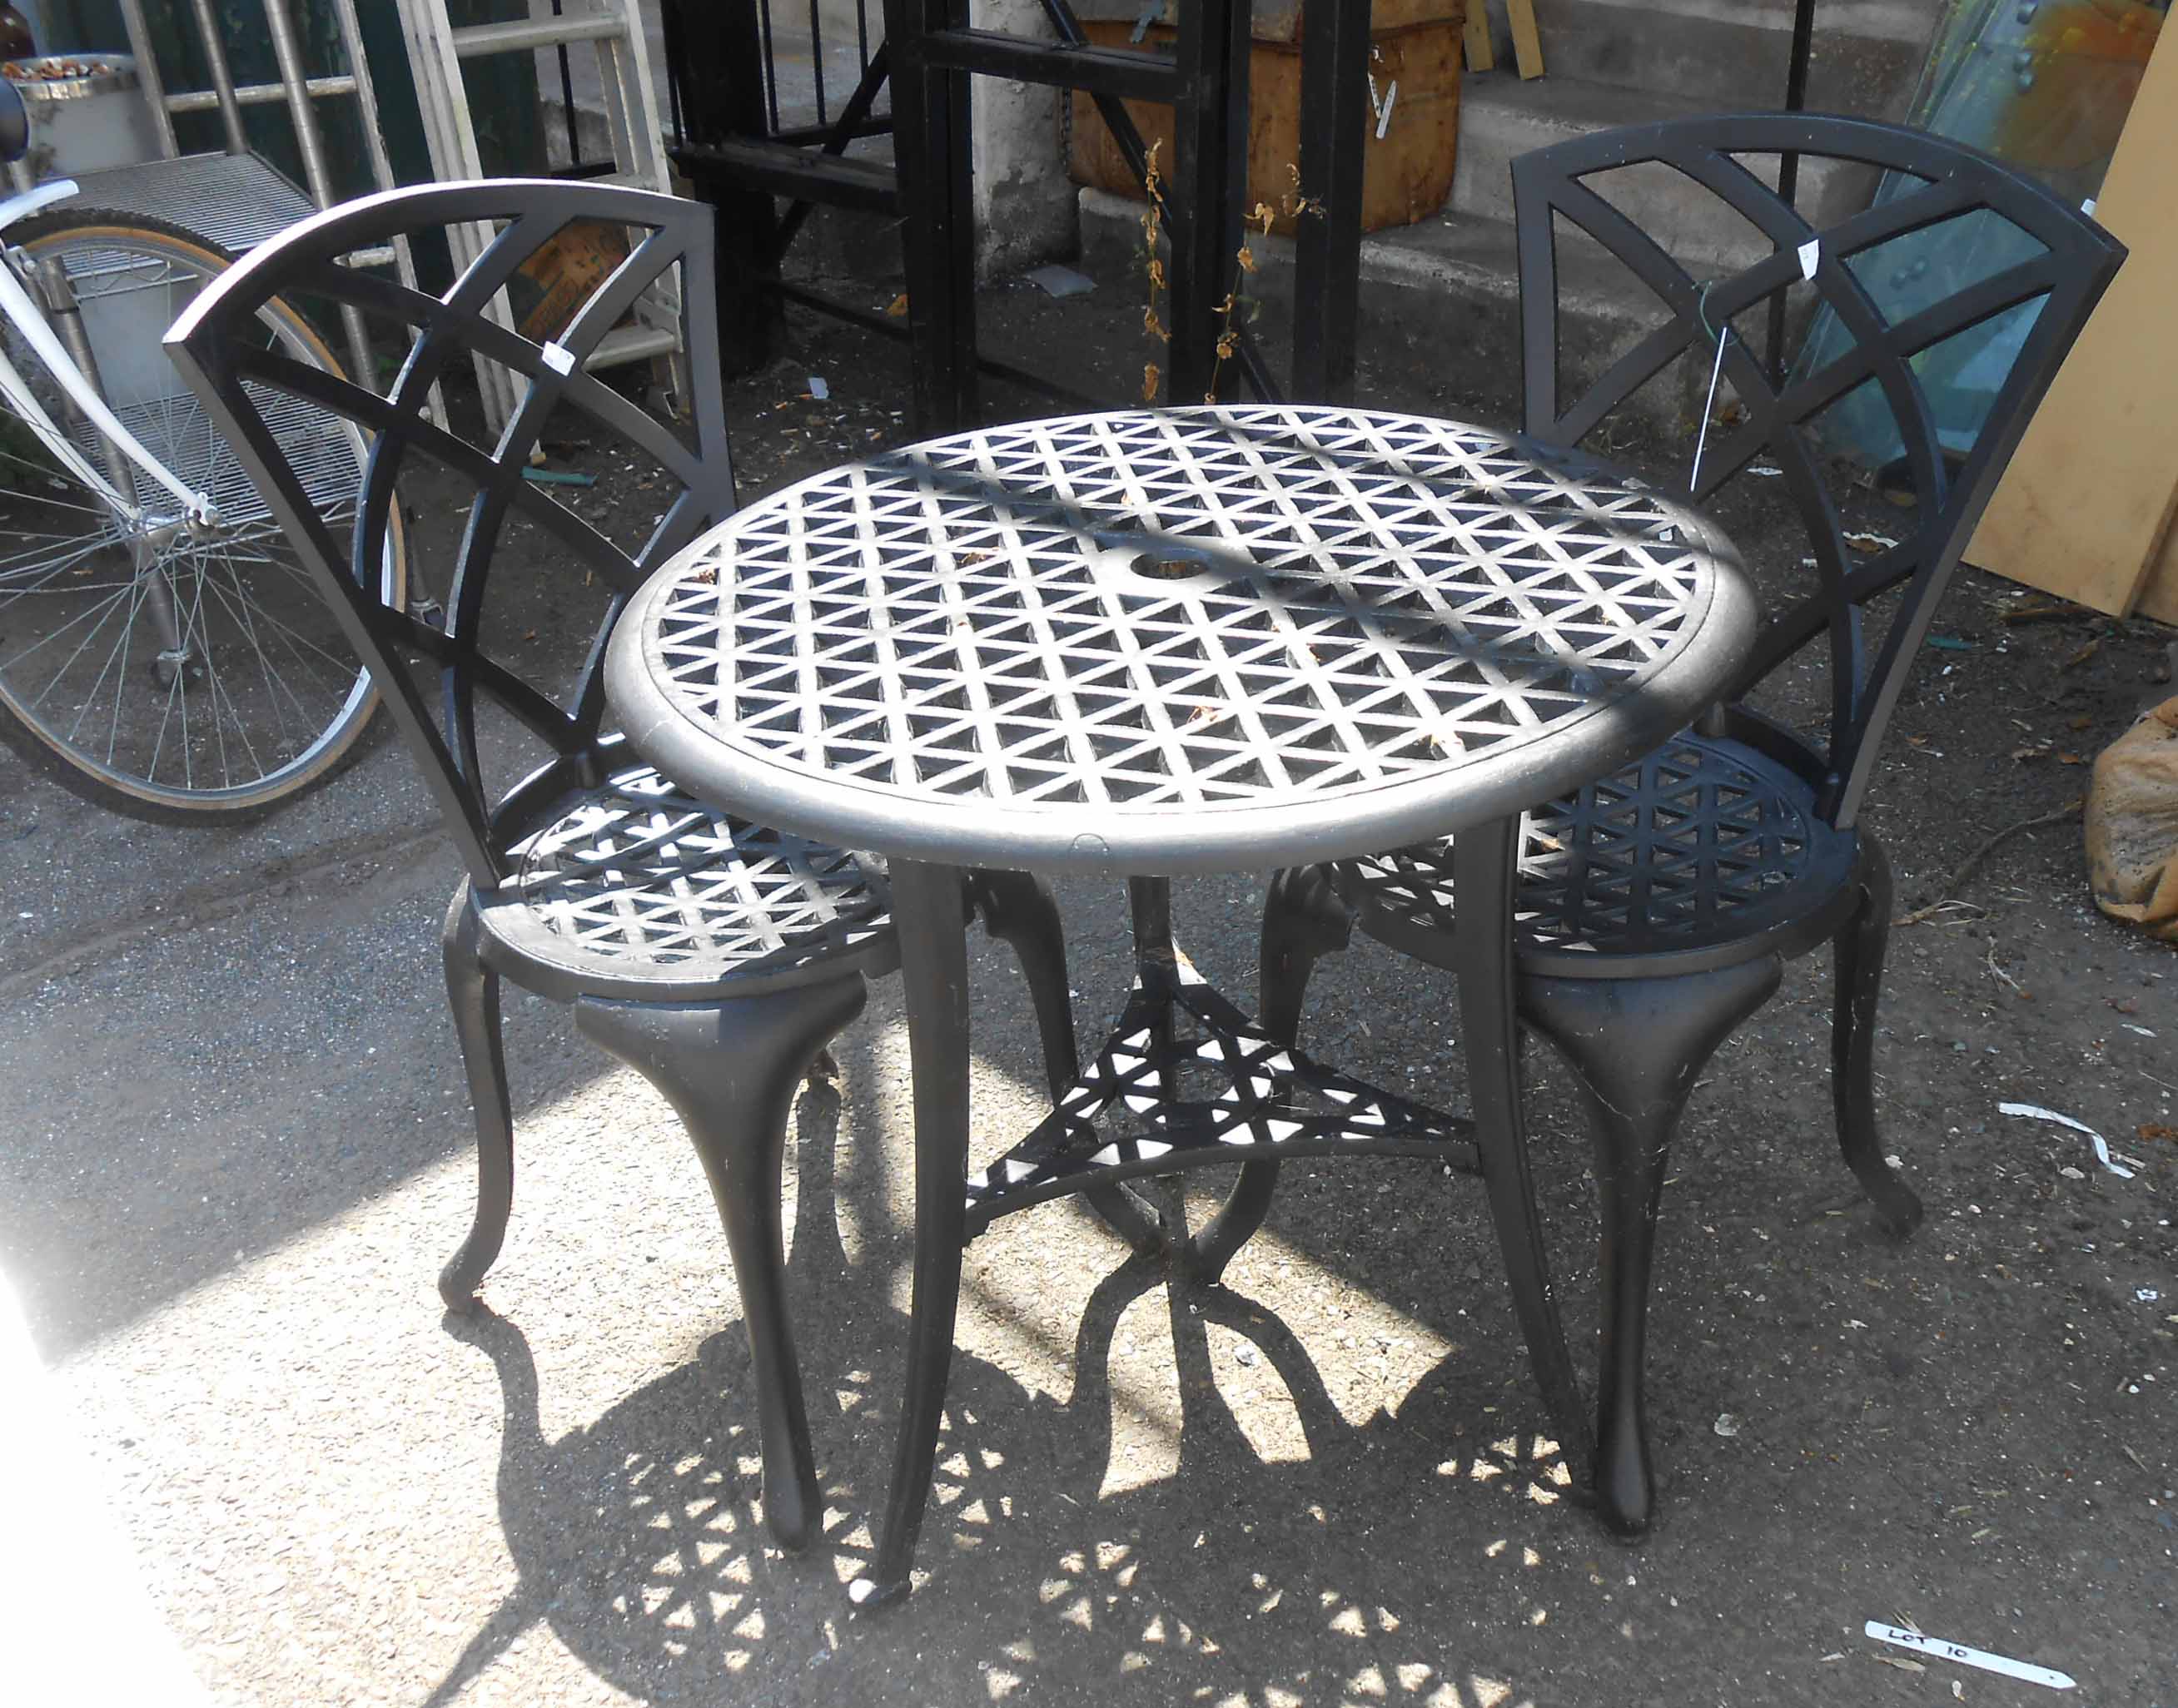 A black painted cast metal table with two chairs - paint flaking